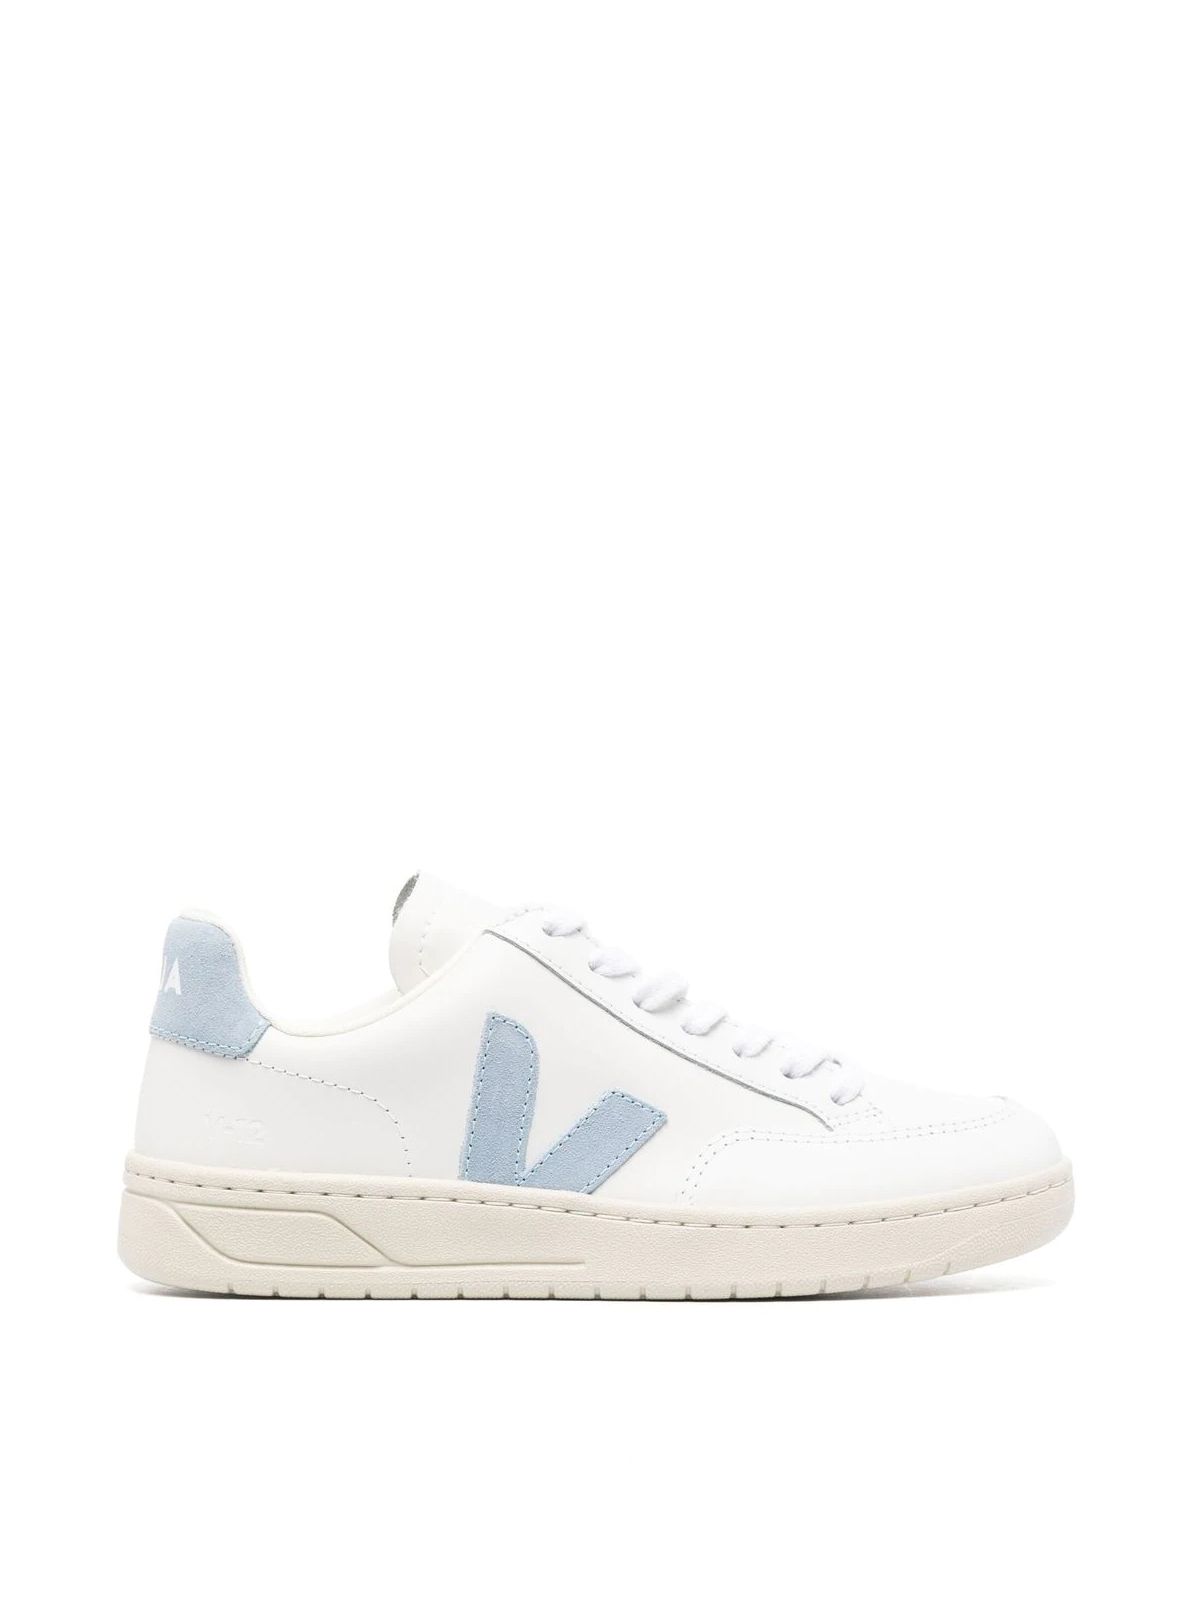 Veja V12 Leather Trainers In Extra White Steel